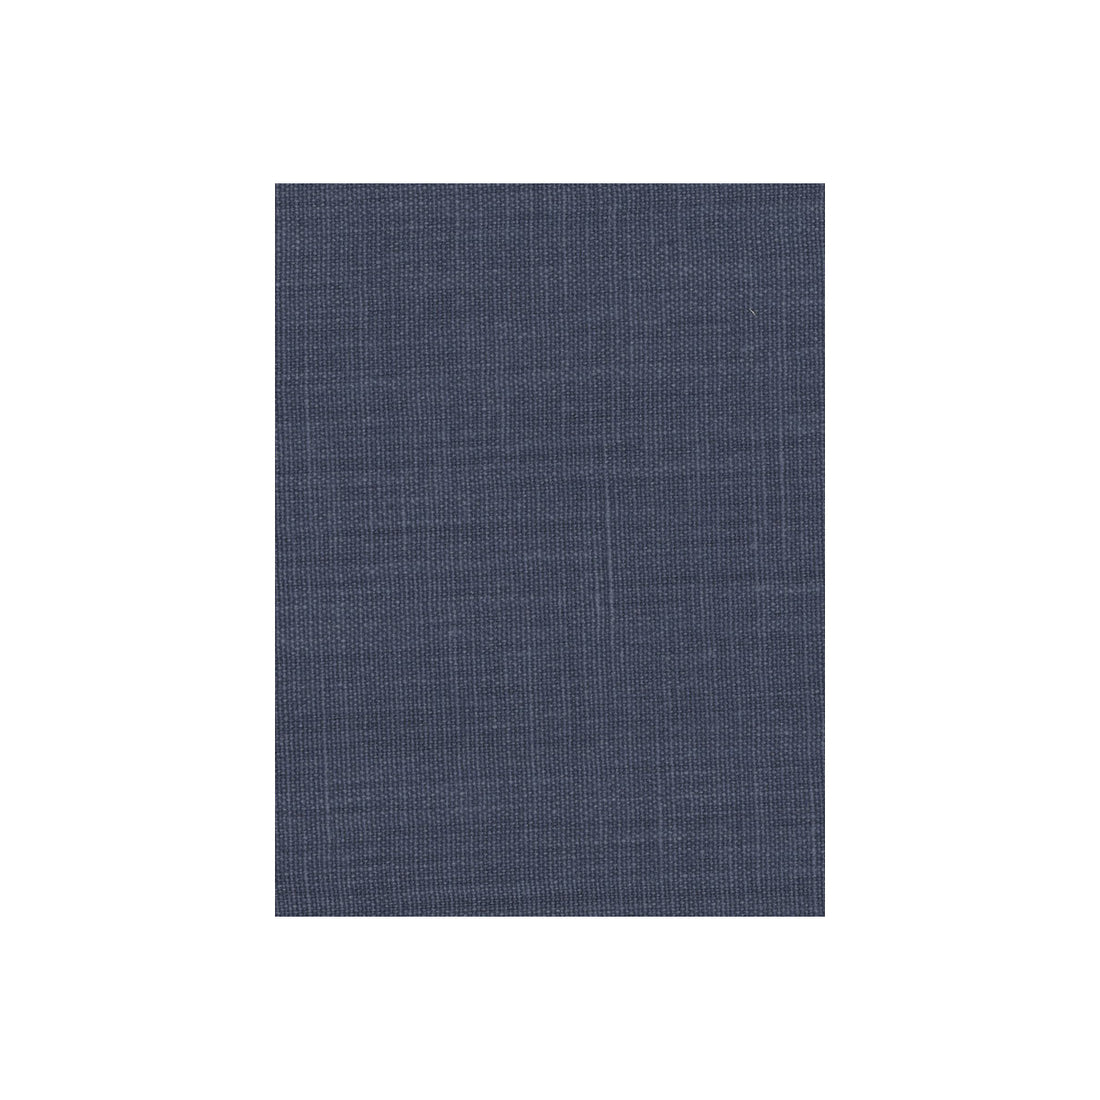 Onslow fabric in denim color - pattern AM100110.5.0 - by Kravet Couture in the Andrew Martin Mews collection